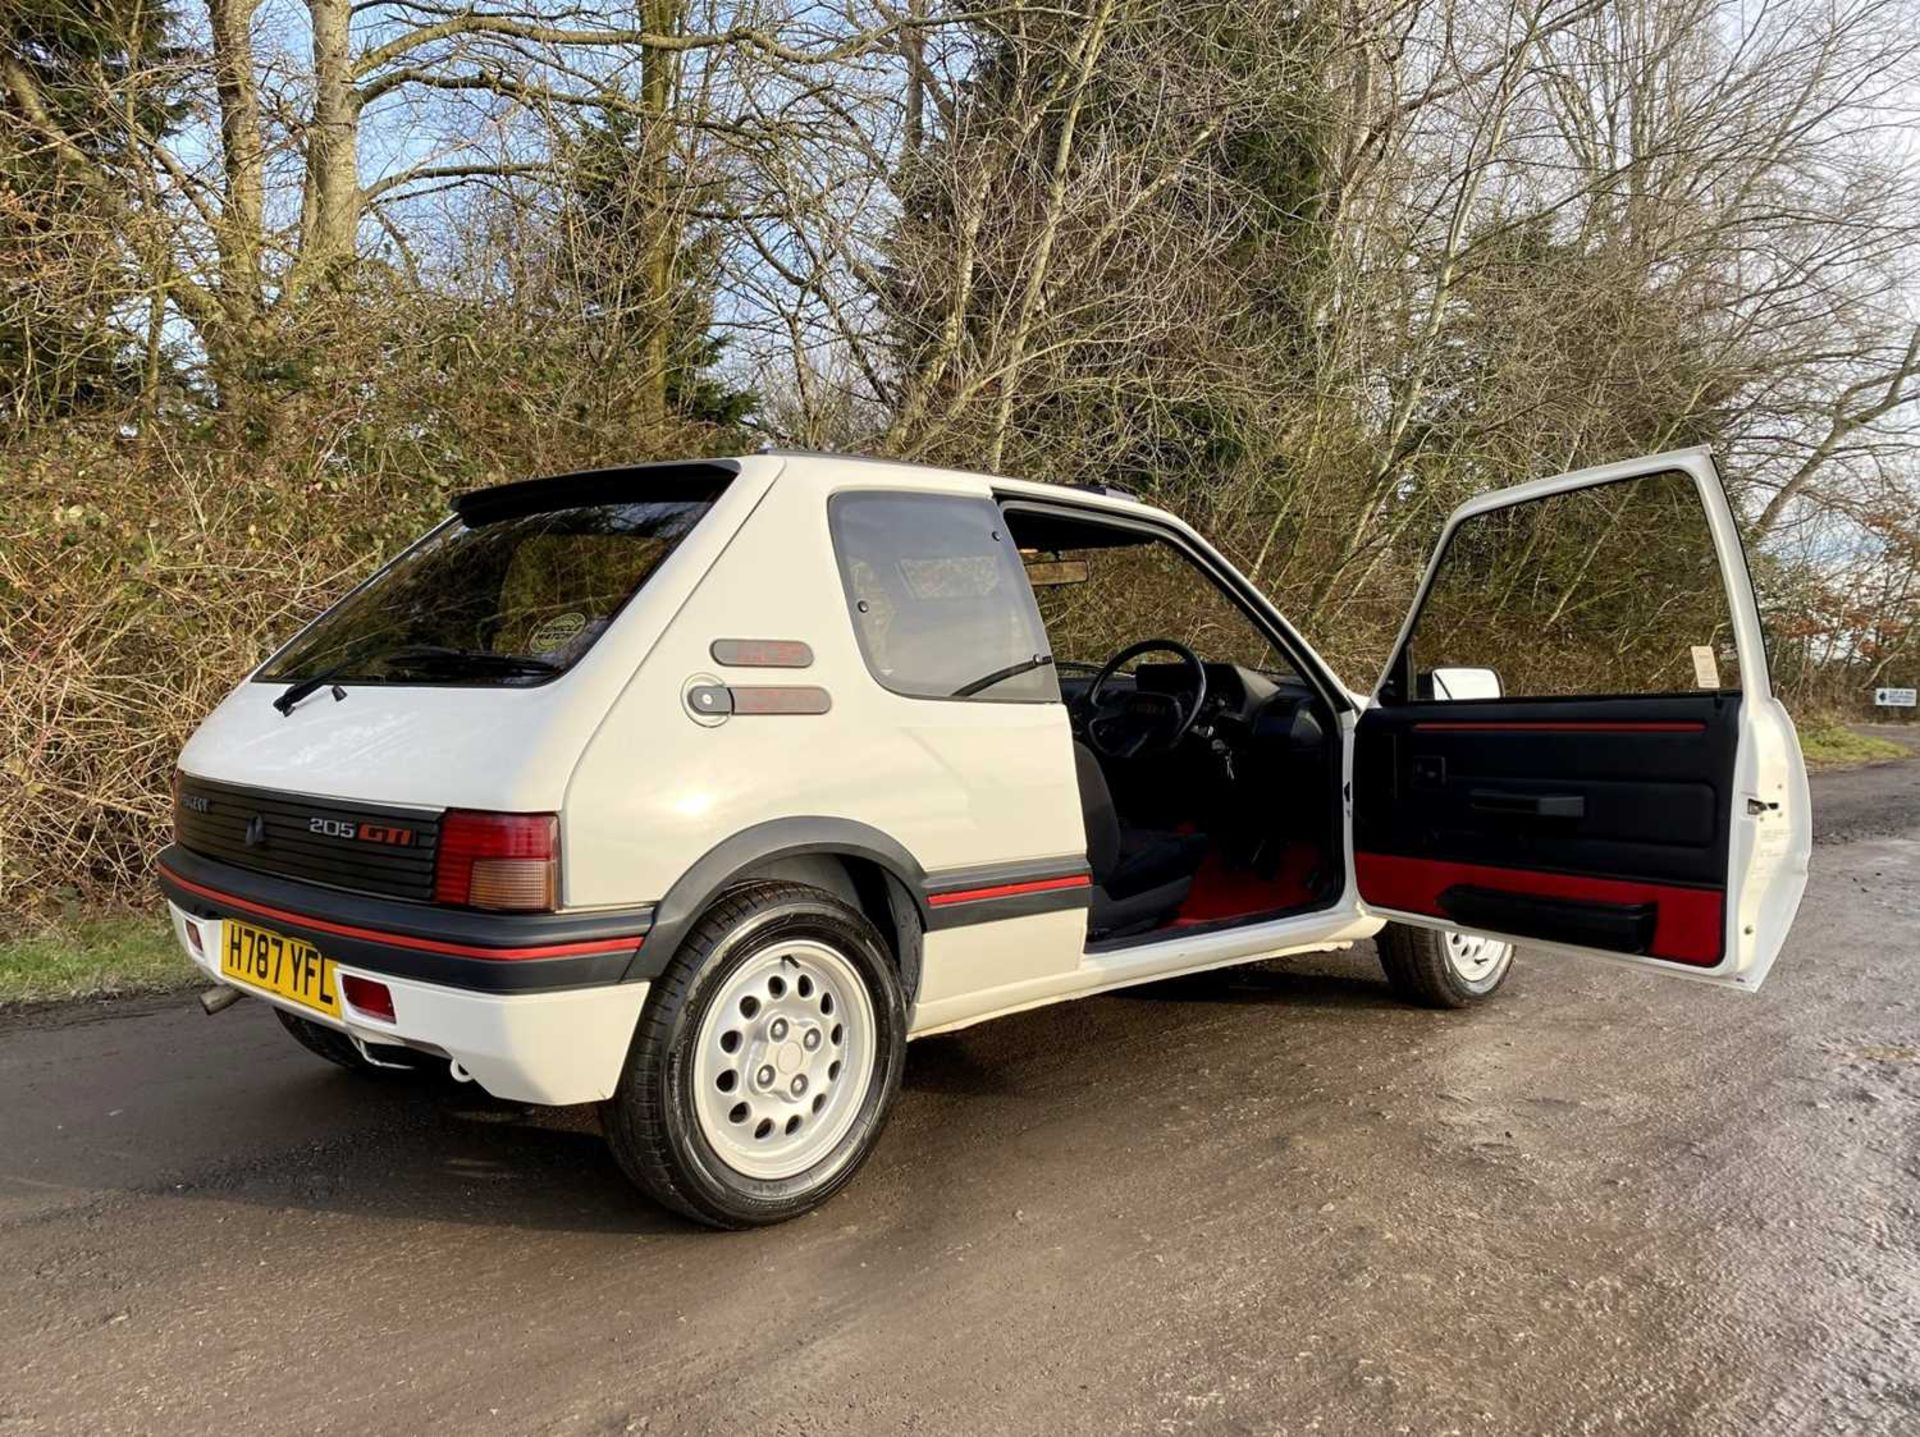 1990 Peugeot 205 GTi 1.6 Only 56,000 miles, same owner for 16 years - Image 27 of 81